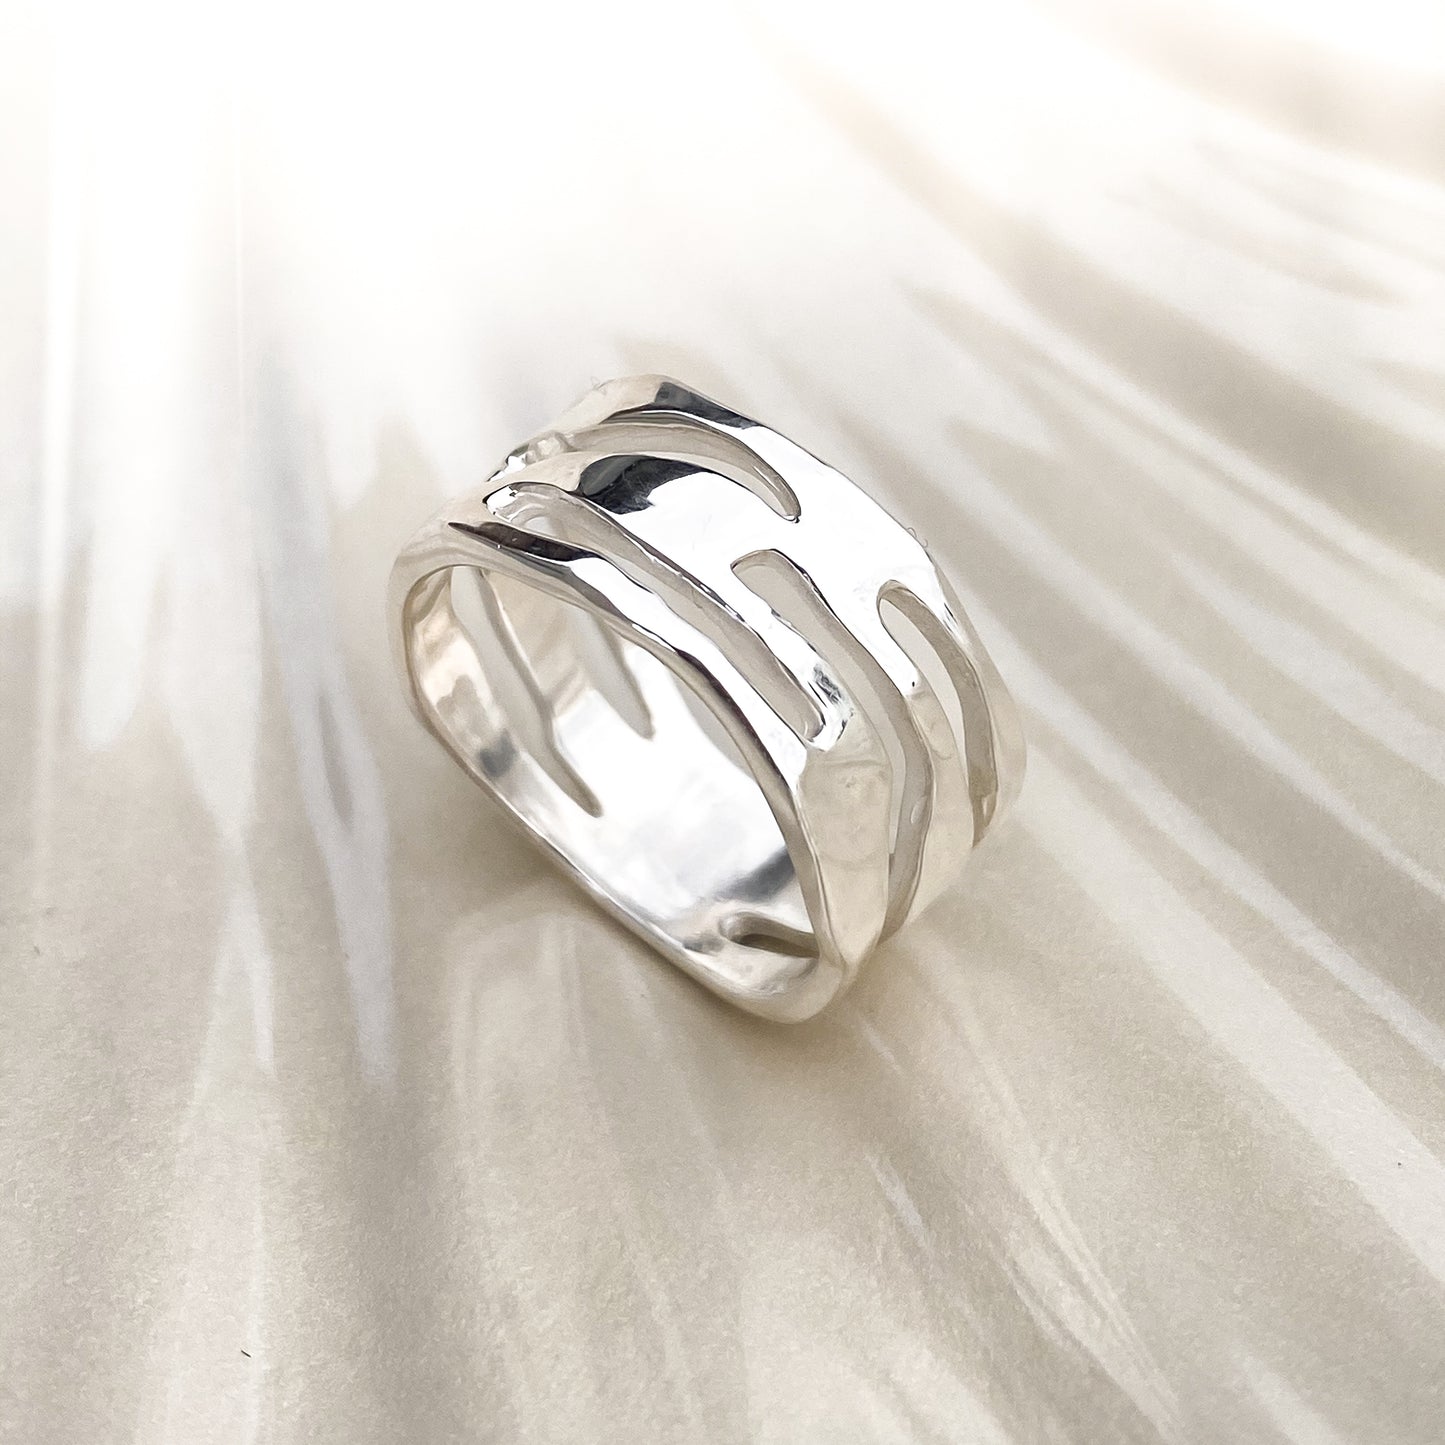 Organic Design Wide Sterling Silver Ring